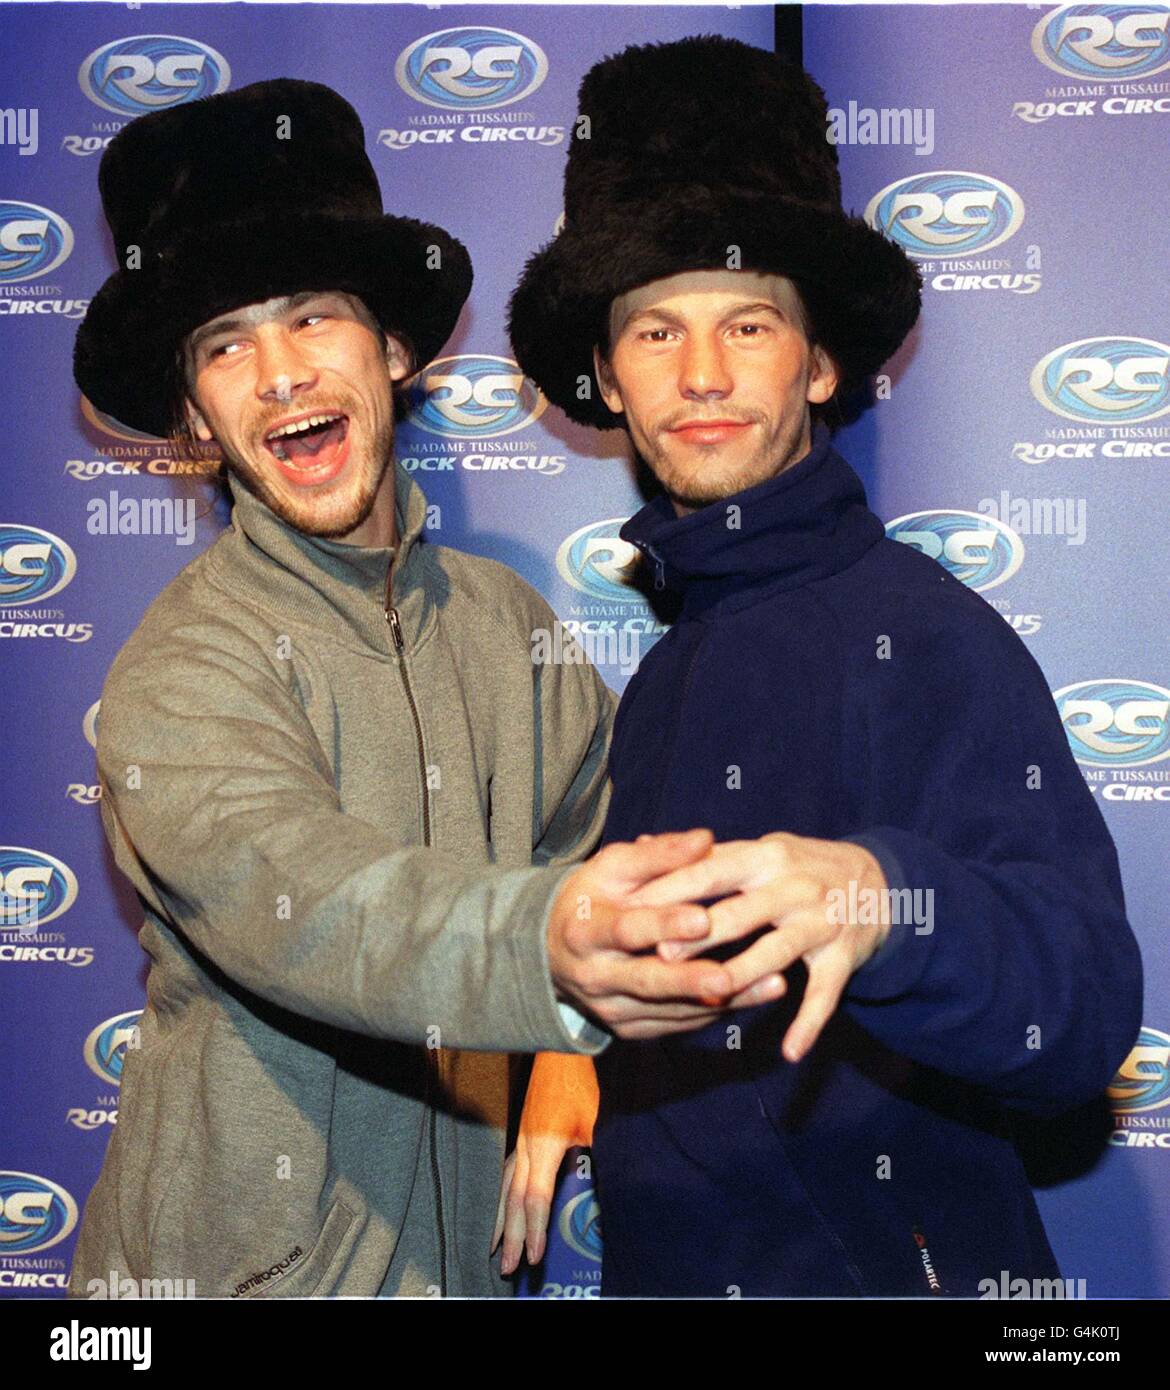 Jamiroquai frontman Jay Kay (left) comes face to face with his wax double,  during a photocall marking the official opening of the totally new look  Madame Tussaud's Rock Circus Stock Photo -